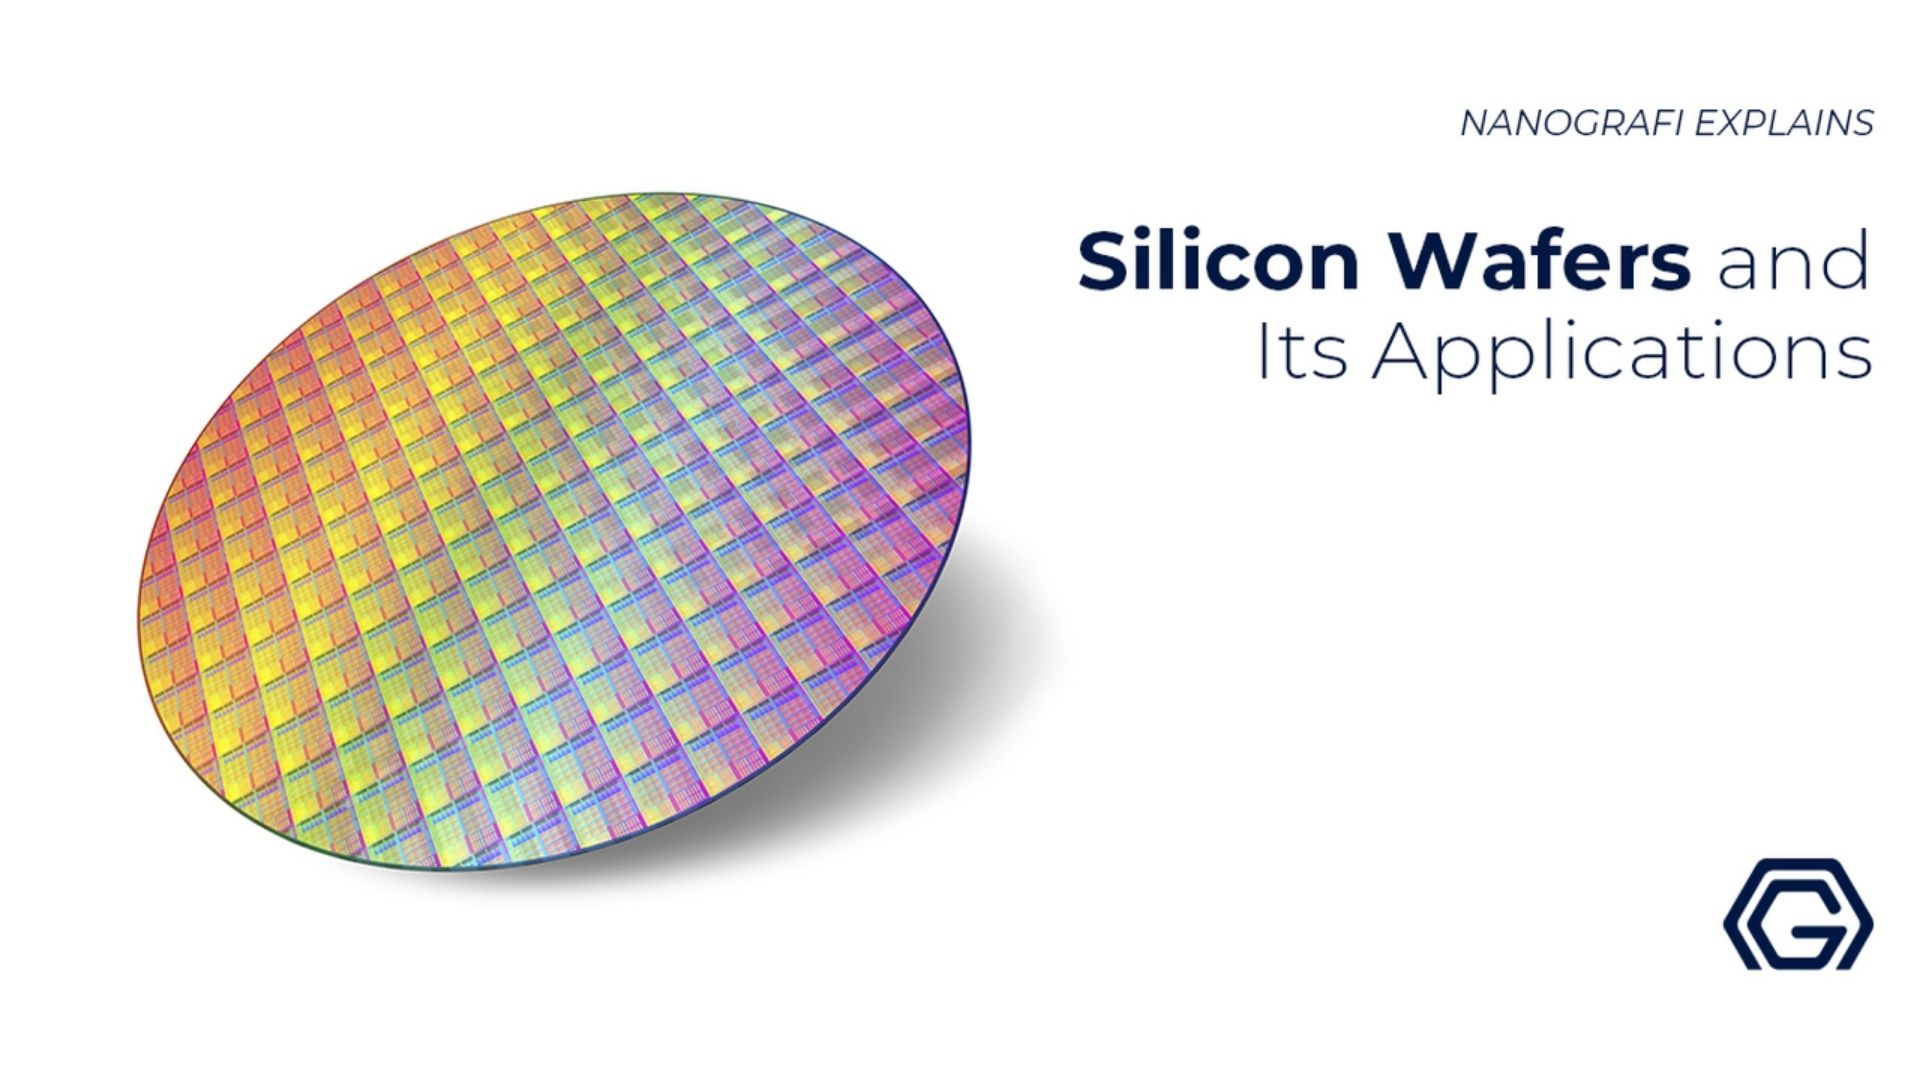 Silicon wafers and its applications